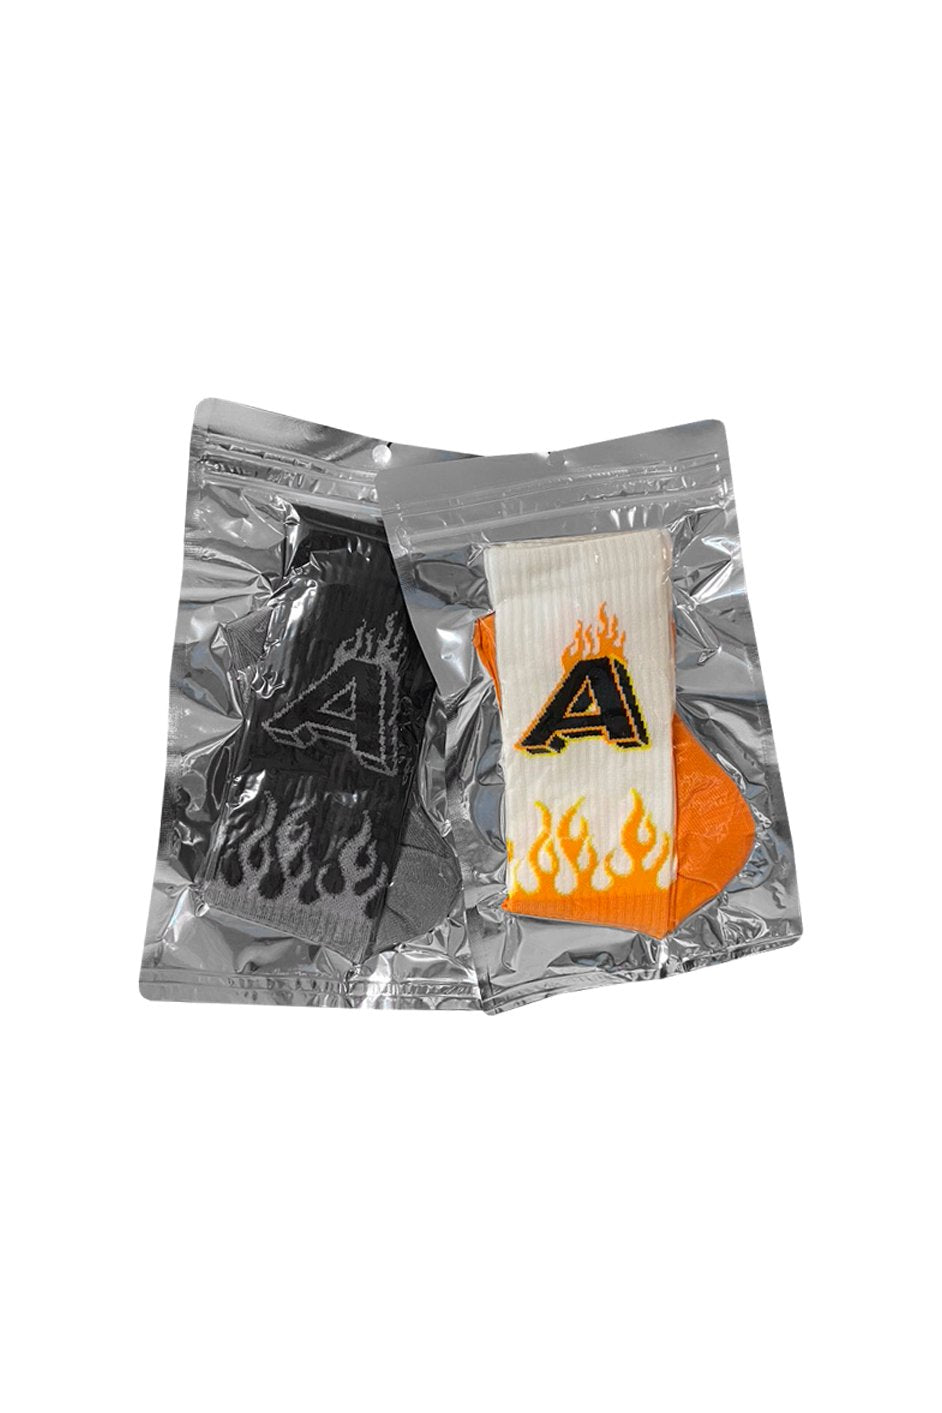 2 PACK FIRE SOCKS "exclusive"